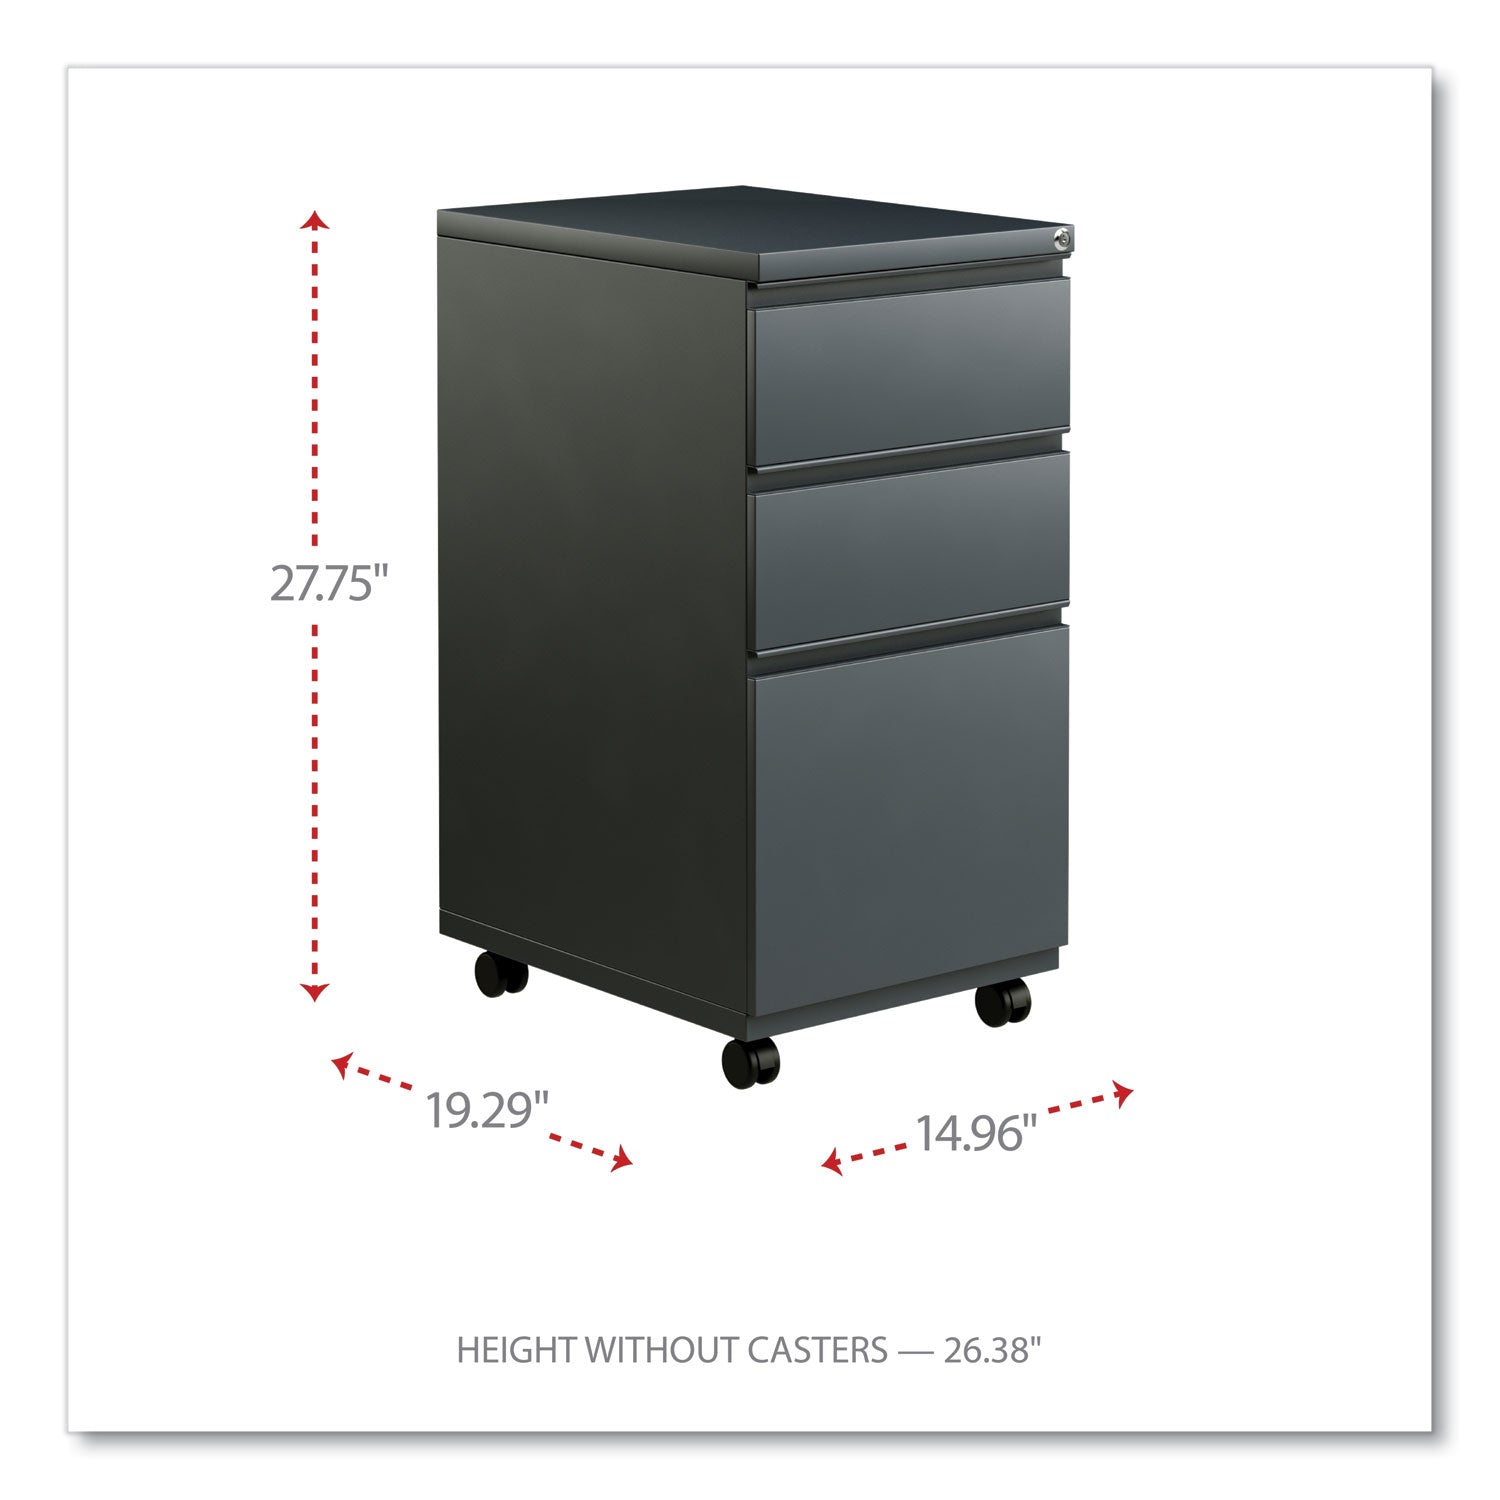 file-pedestal-with-full-length-pull-left-or-right-3-drawers-box-box-file-legal-letter-charcoal-1496-x-1929-x-2775_alepbbbfch - 2